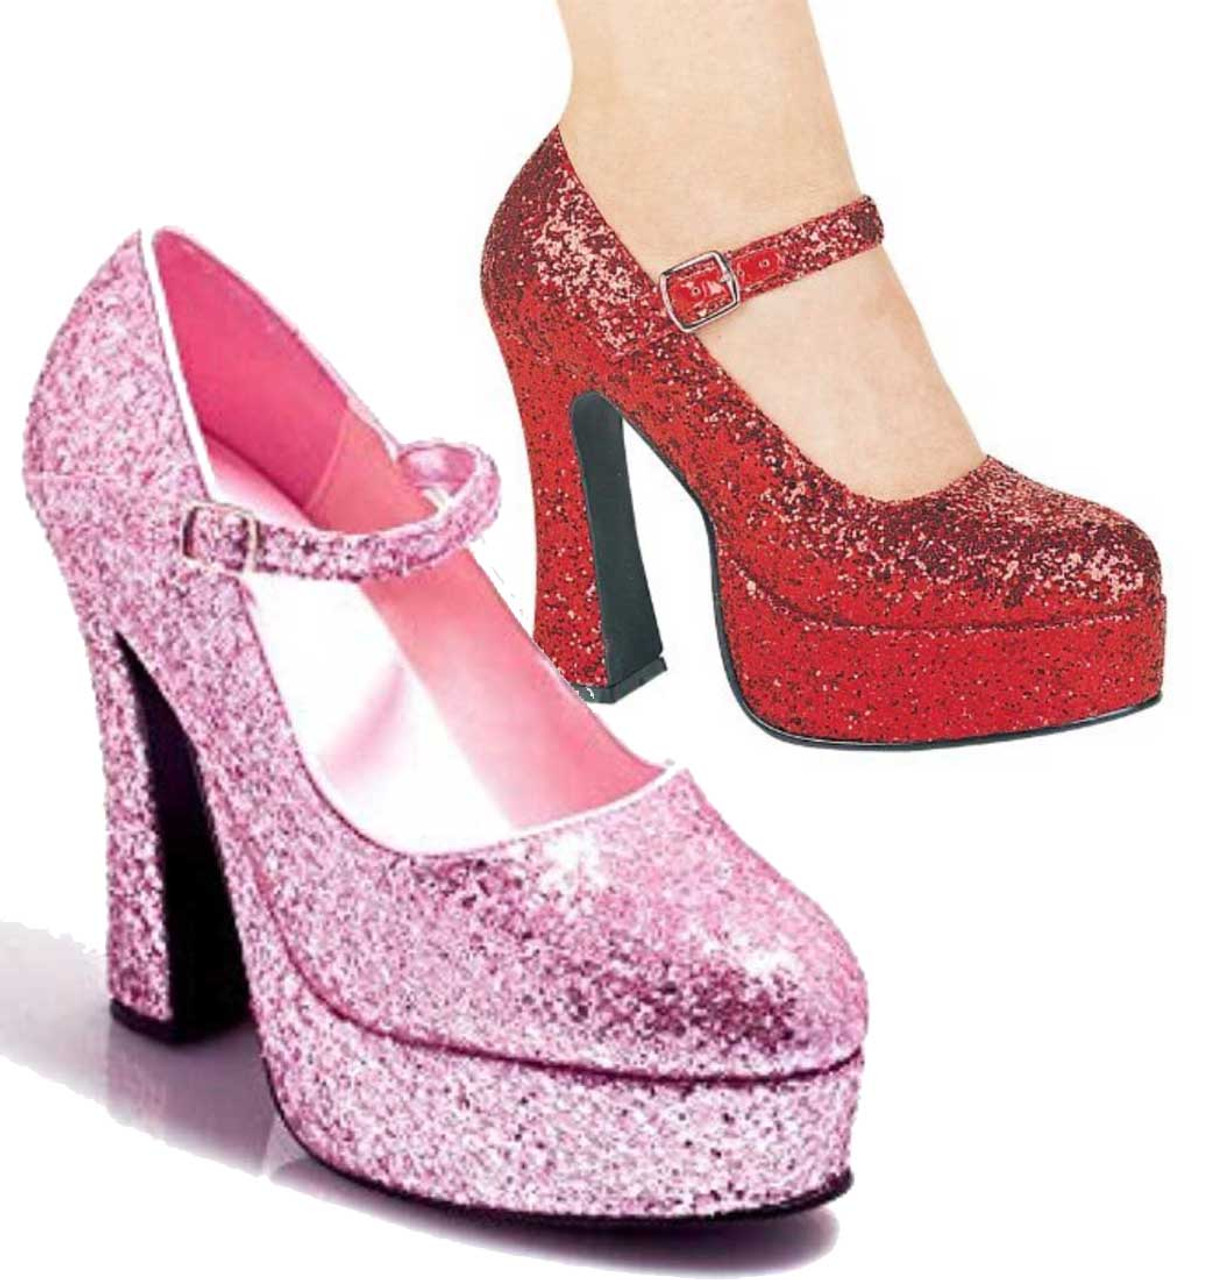 red glitter mary janes